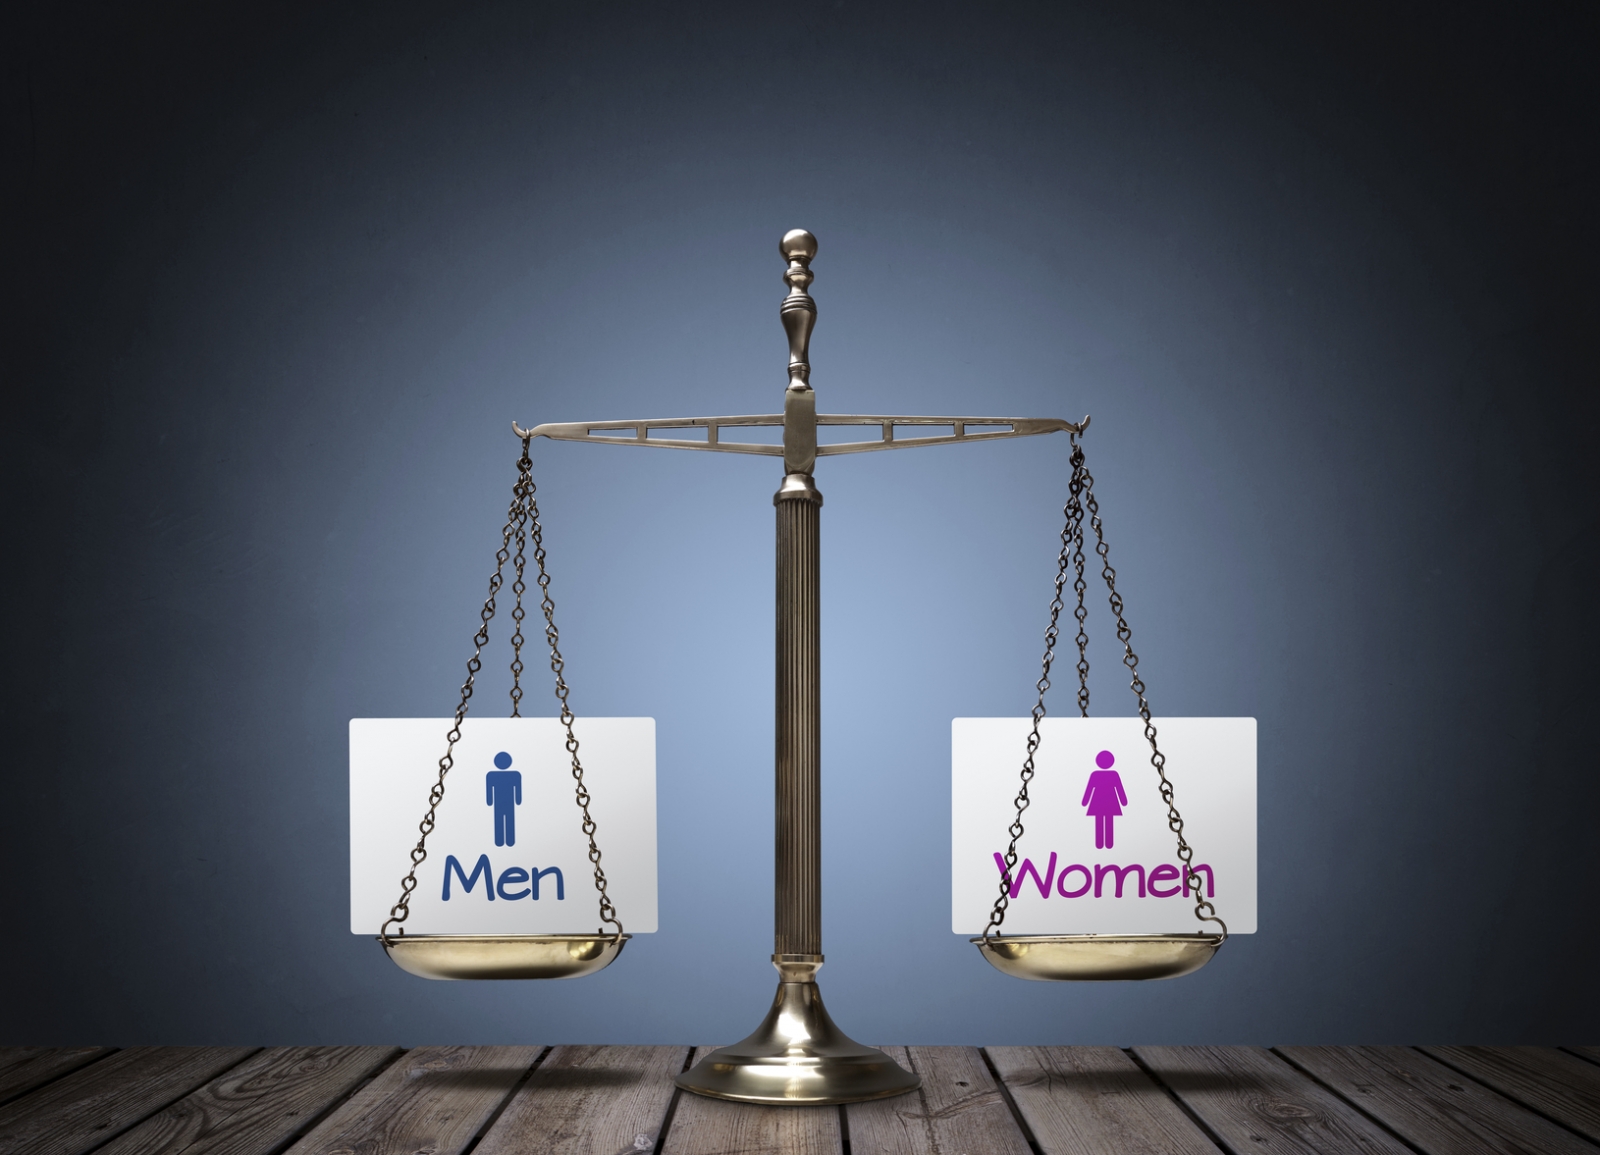 Feminism and Meninism: What is the problem with men's rights activism?